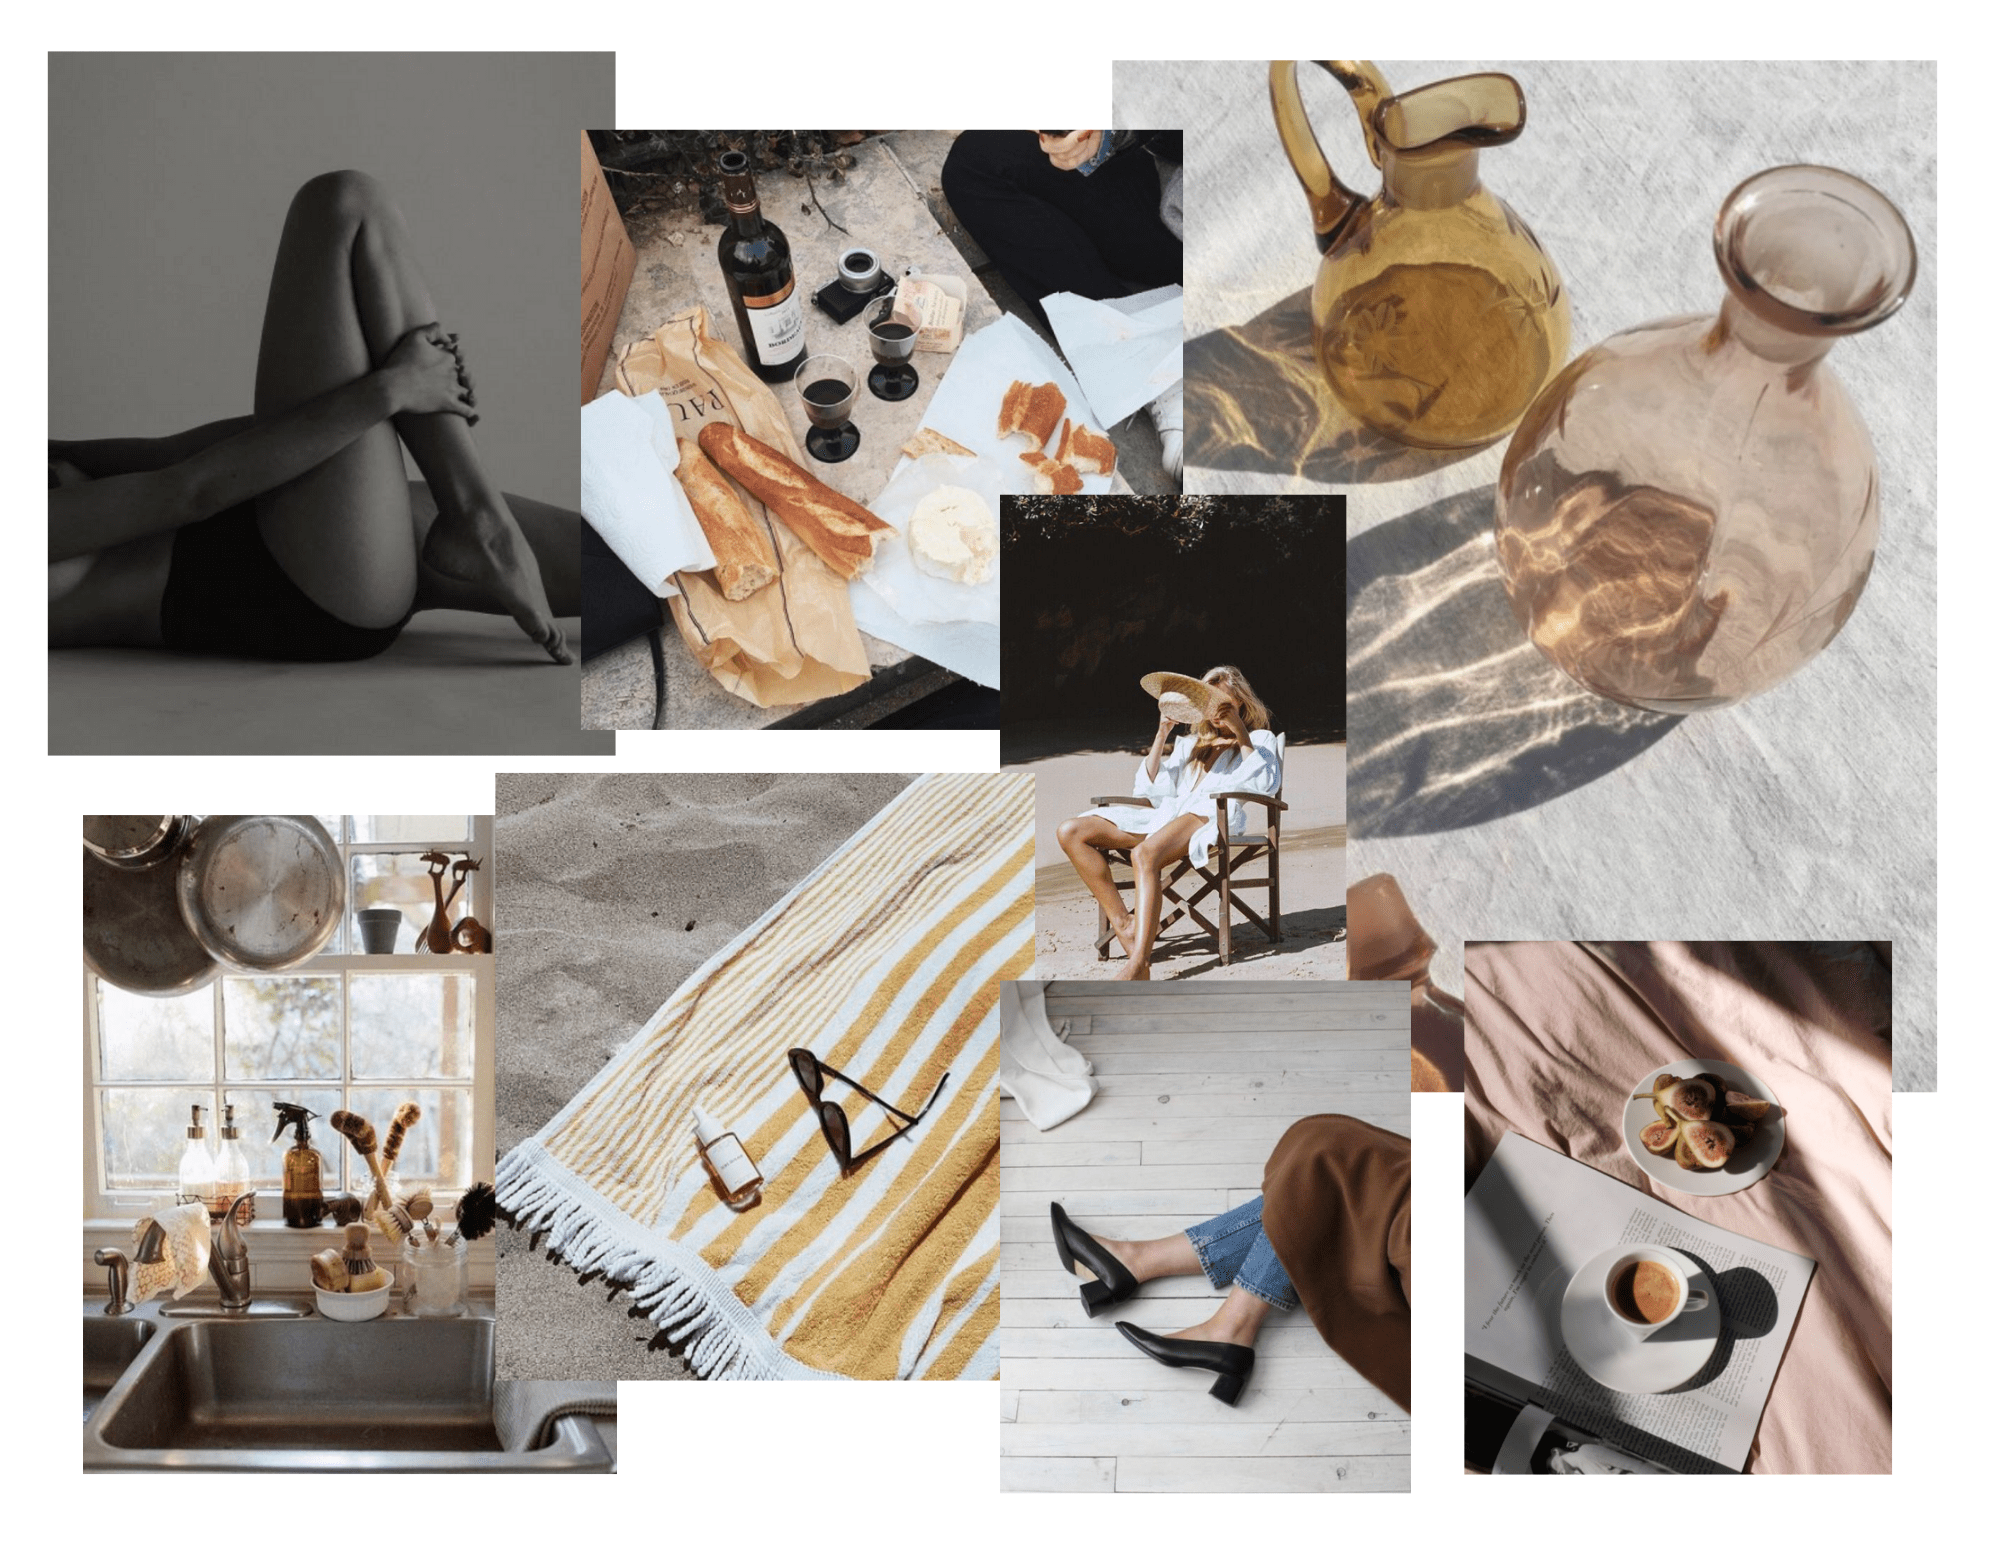 collage of images to inspire fall mood, glass pitchers, woman on beach chair, coffee on table, fall heels jeans and shoes, yellow and white striped beach towel with sunglasses, kitchen sink, bread wine and cheese, yoga pose